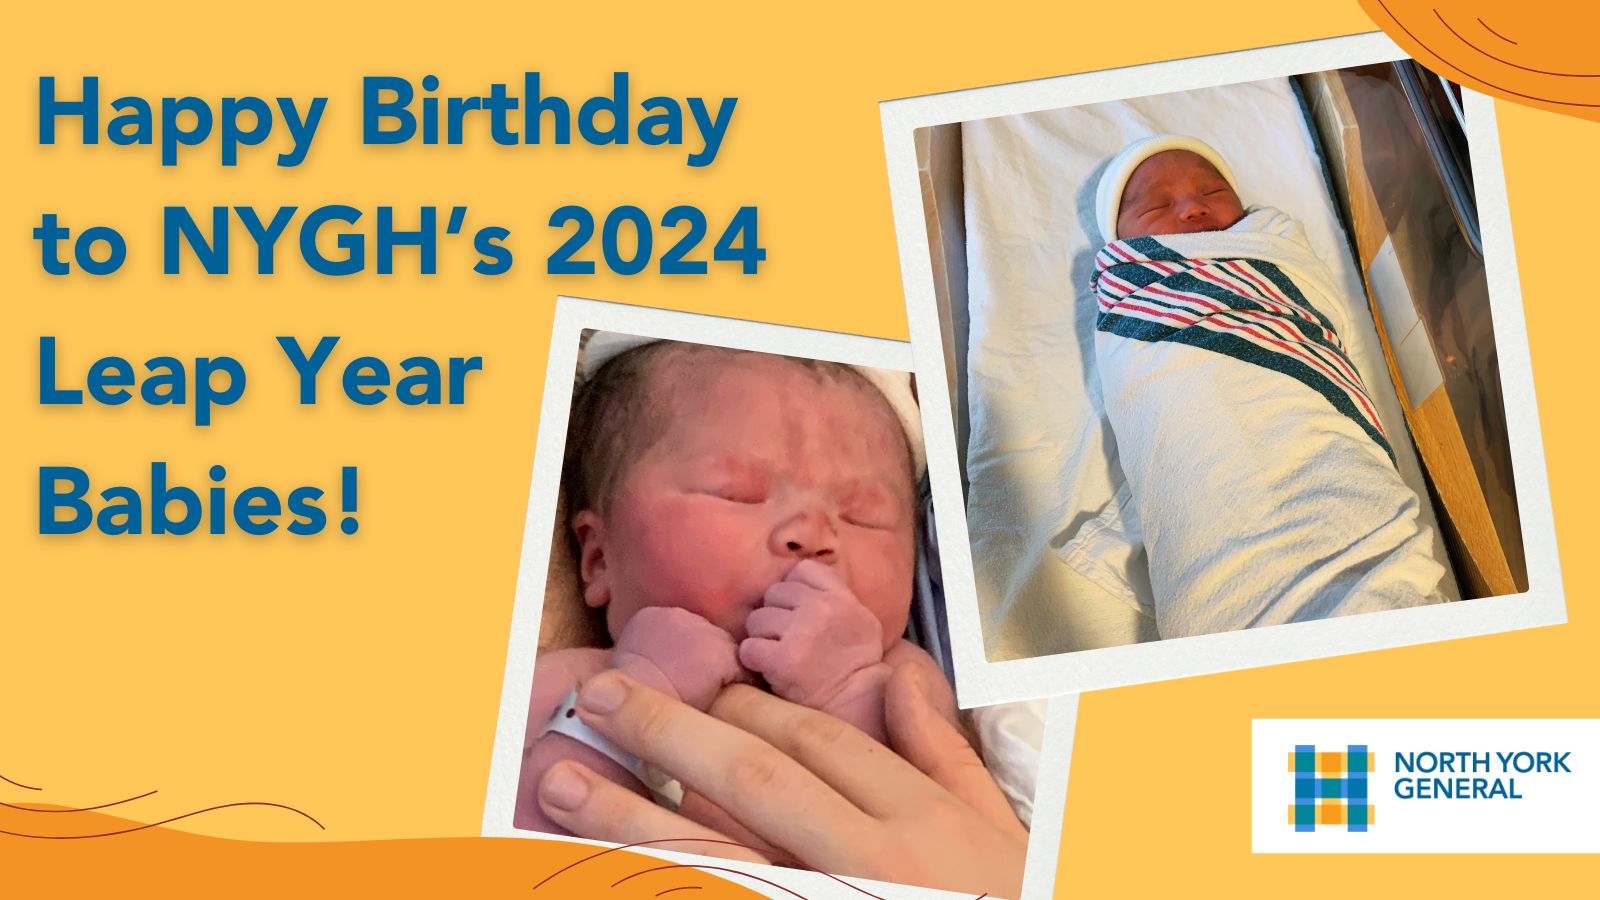 Happy Birthday to NYGH's 2024 Leap Year Babies